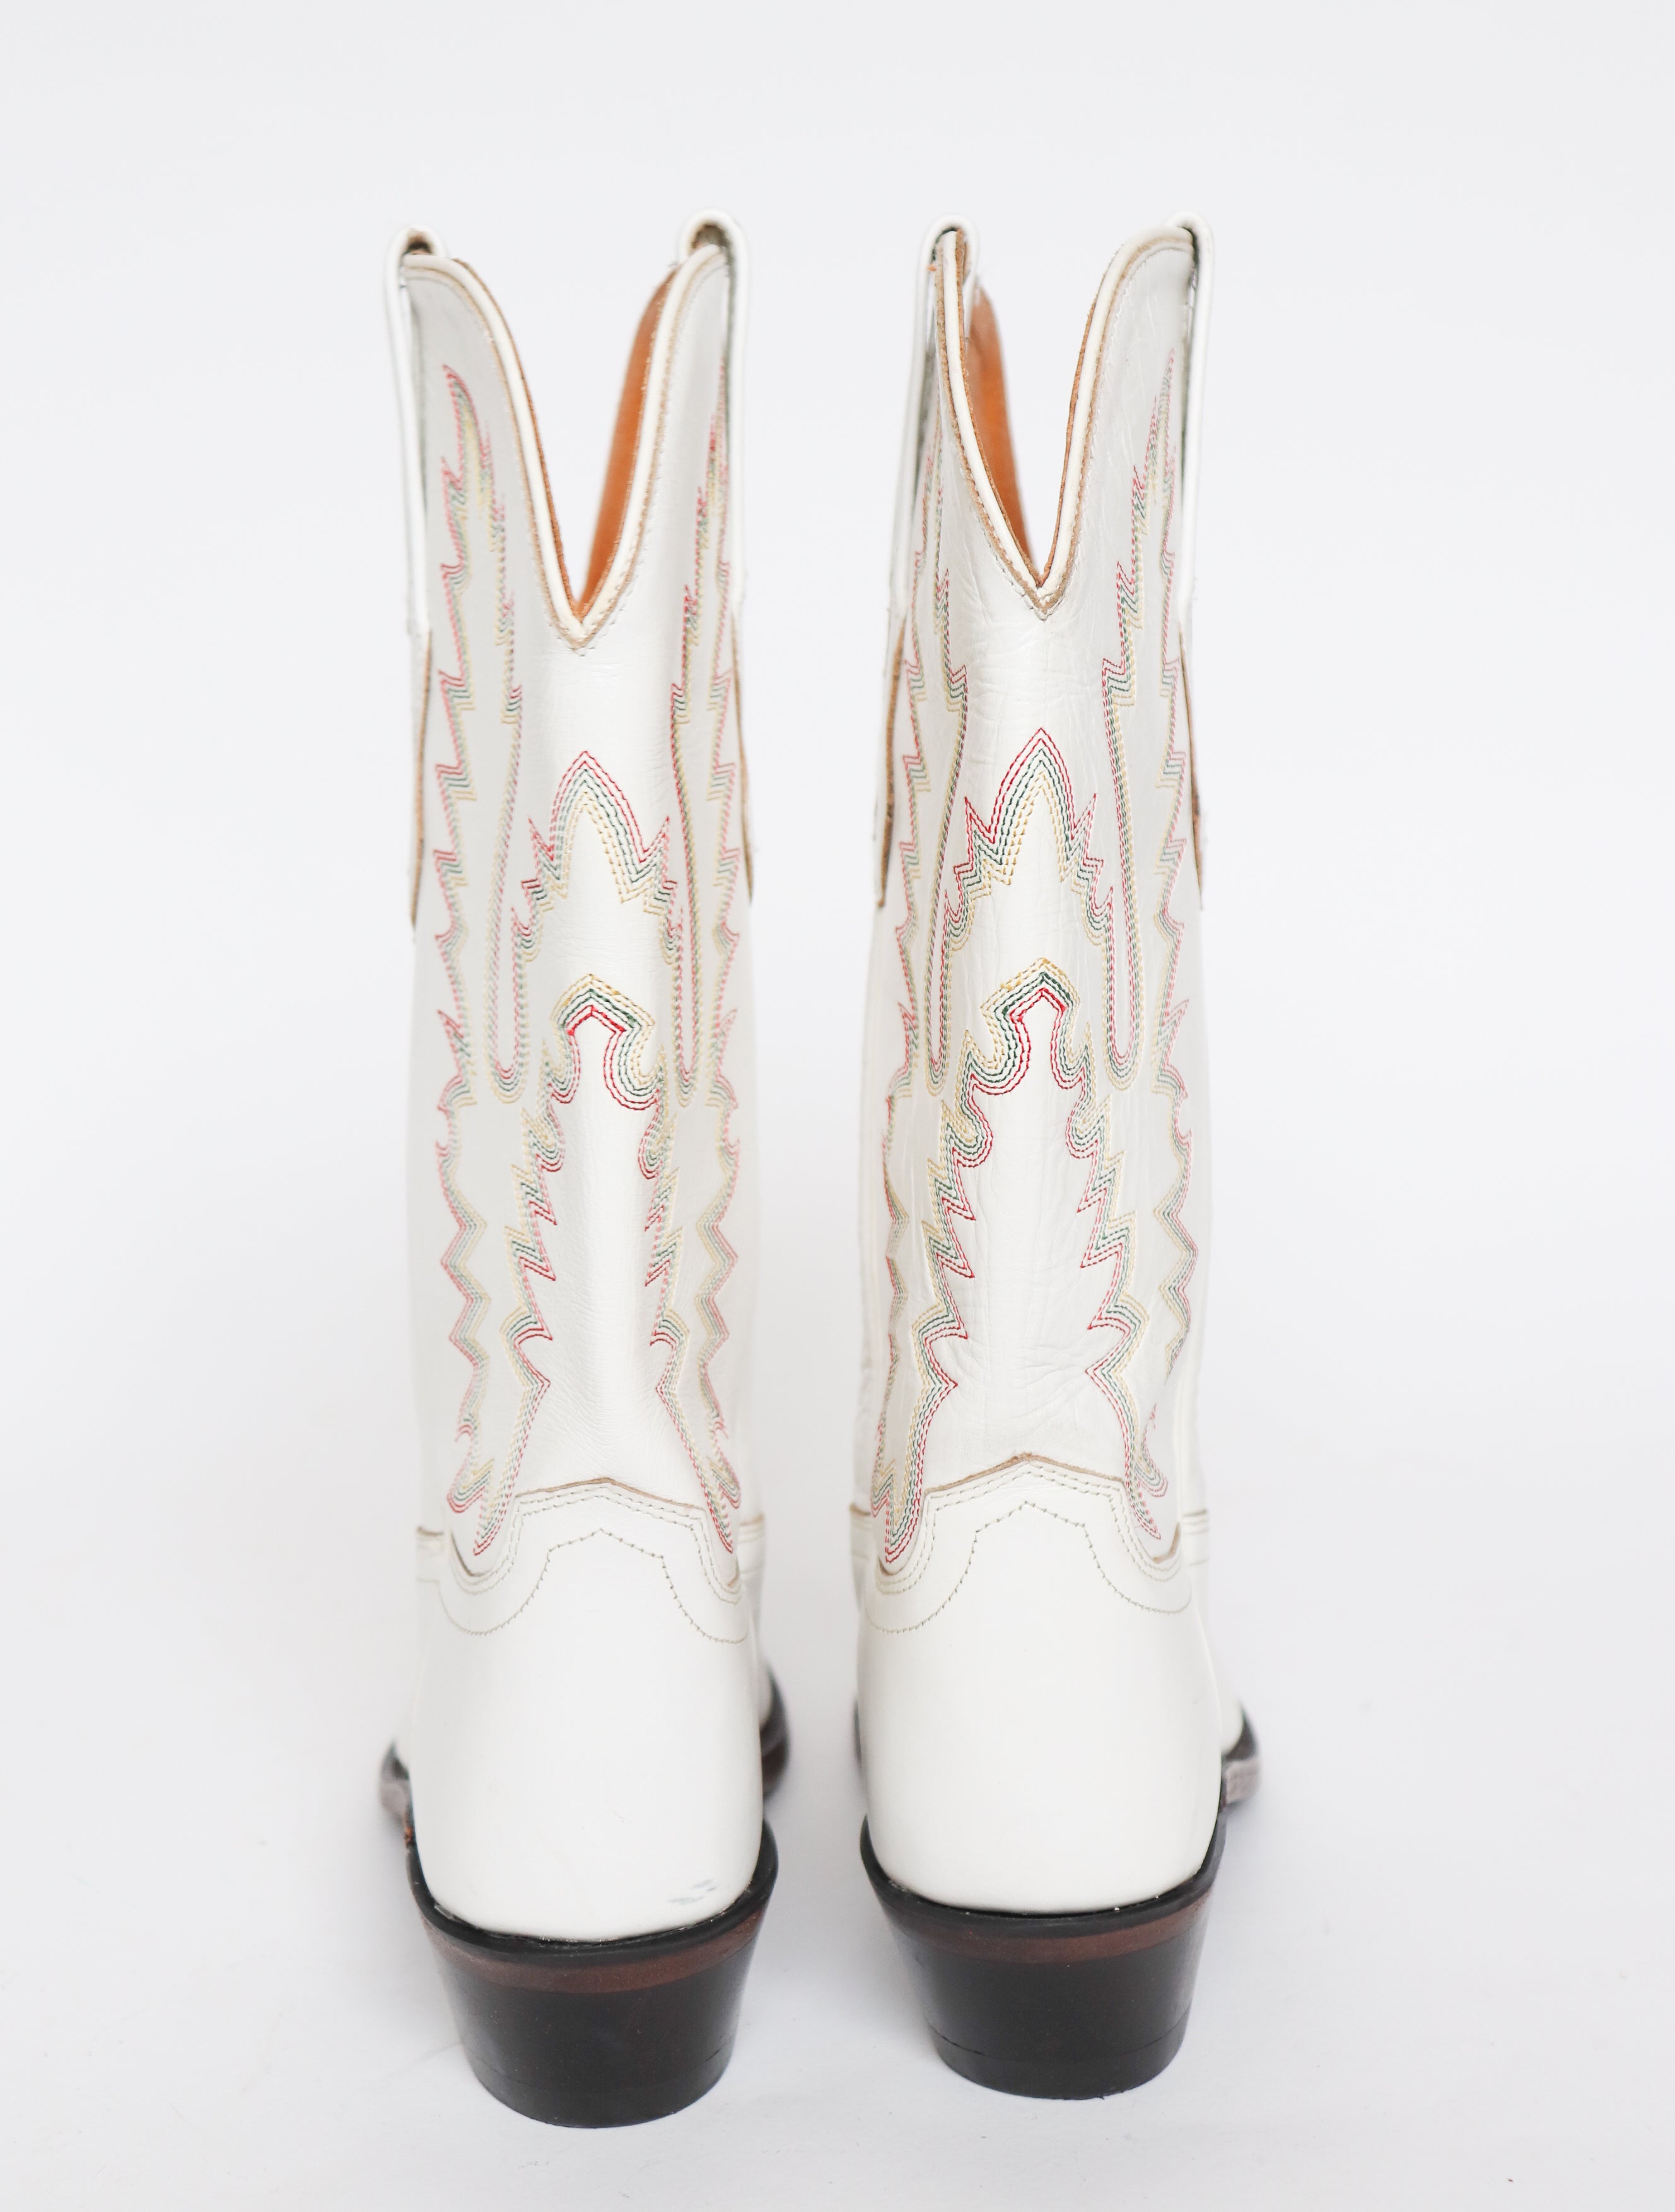 White Leather Cowboy  Boots - Old West - 41 /  Fit UK 7.5